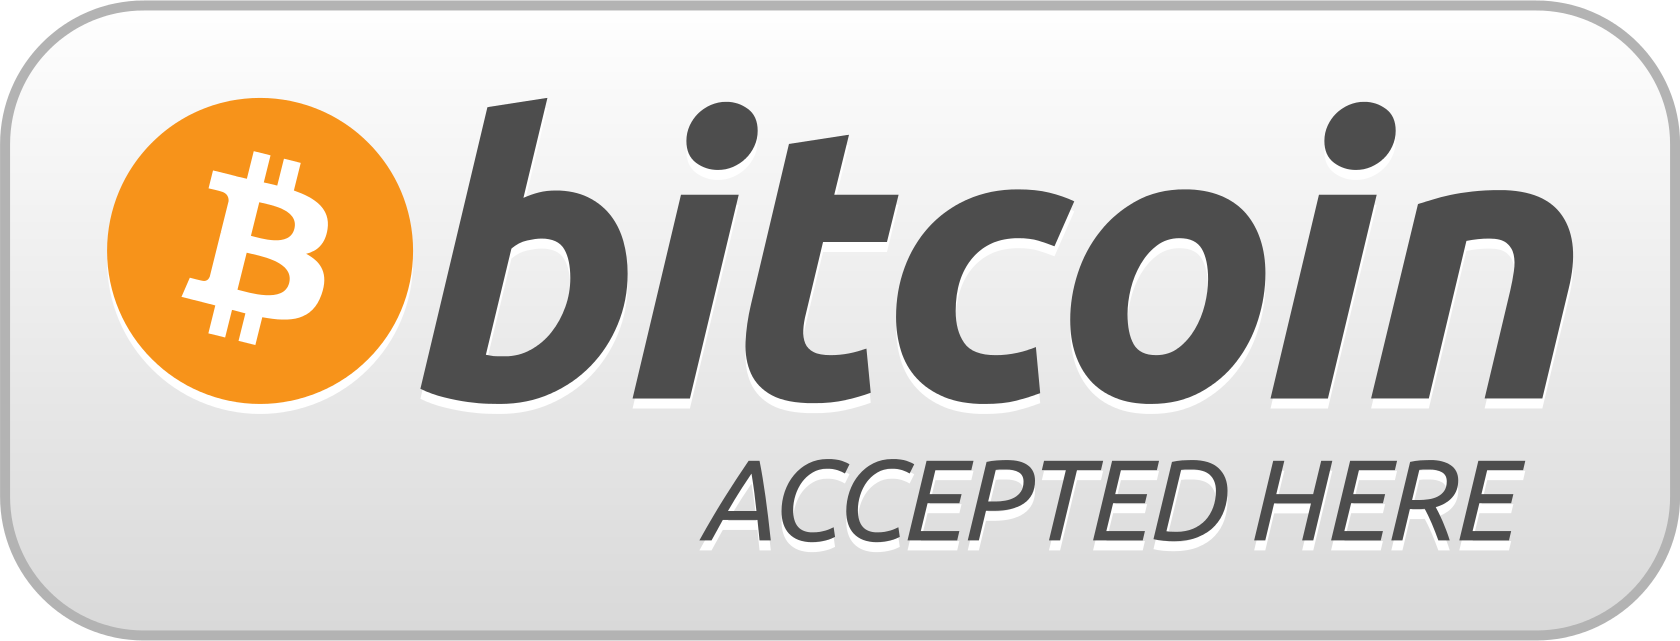 More information about "Bitcoin accepted here"